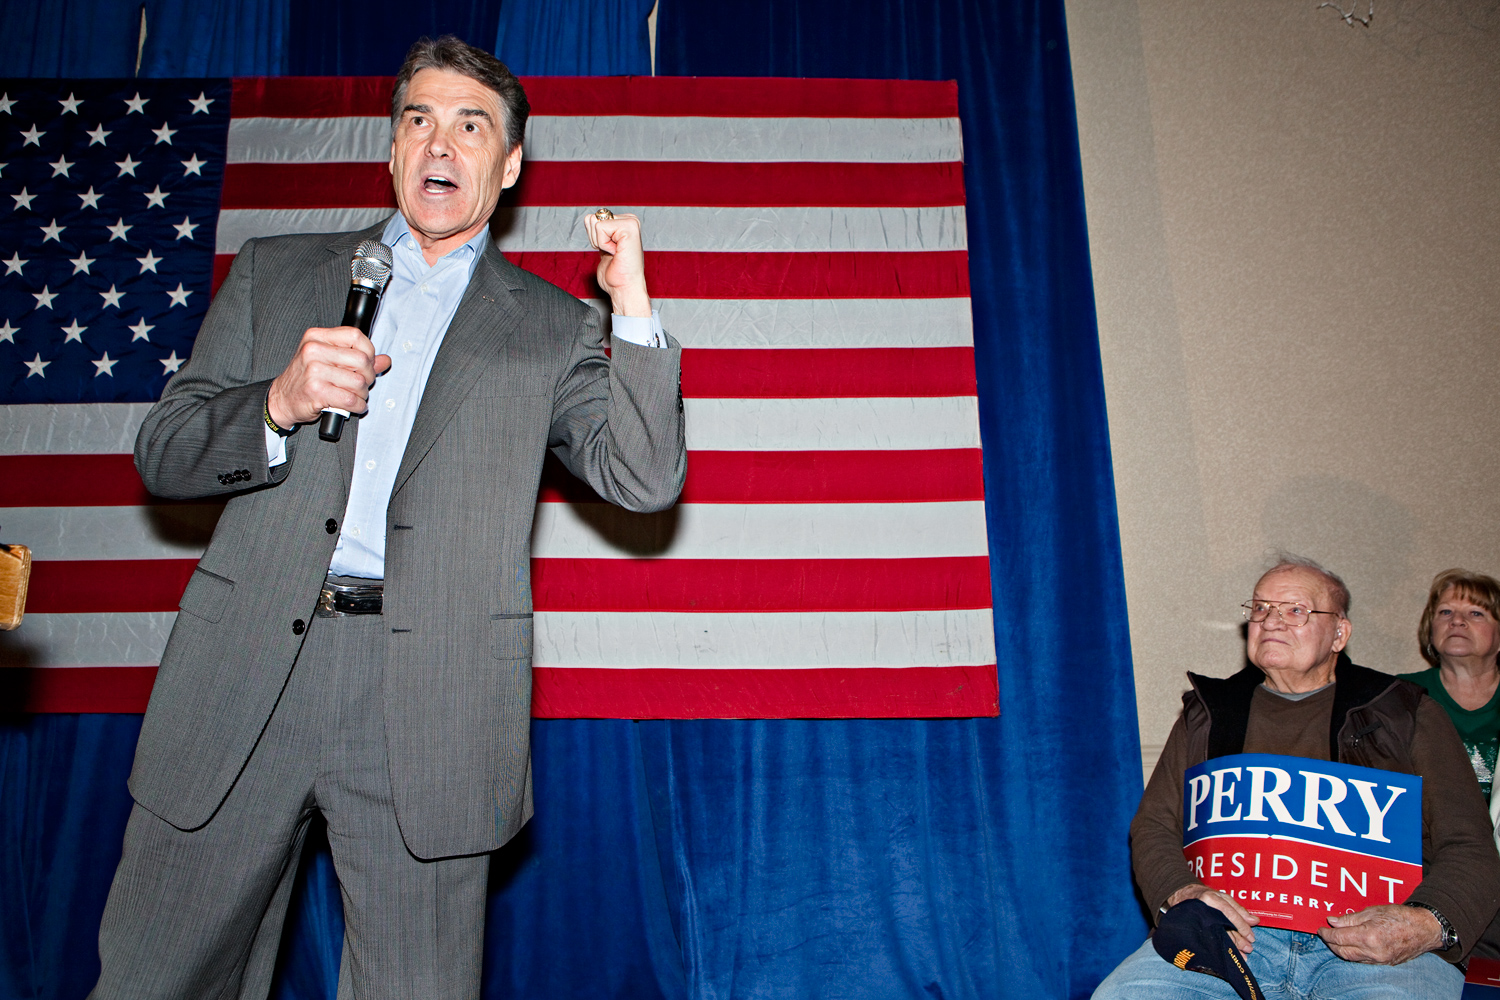 Rick Perry campaigns at The Gigglin' Goat in Boone, IA on December 31, 2011.